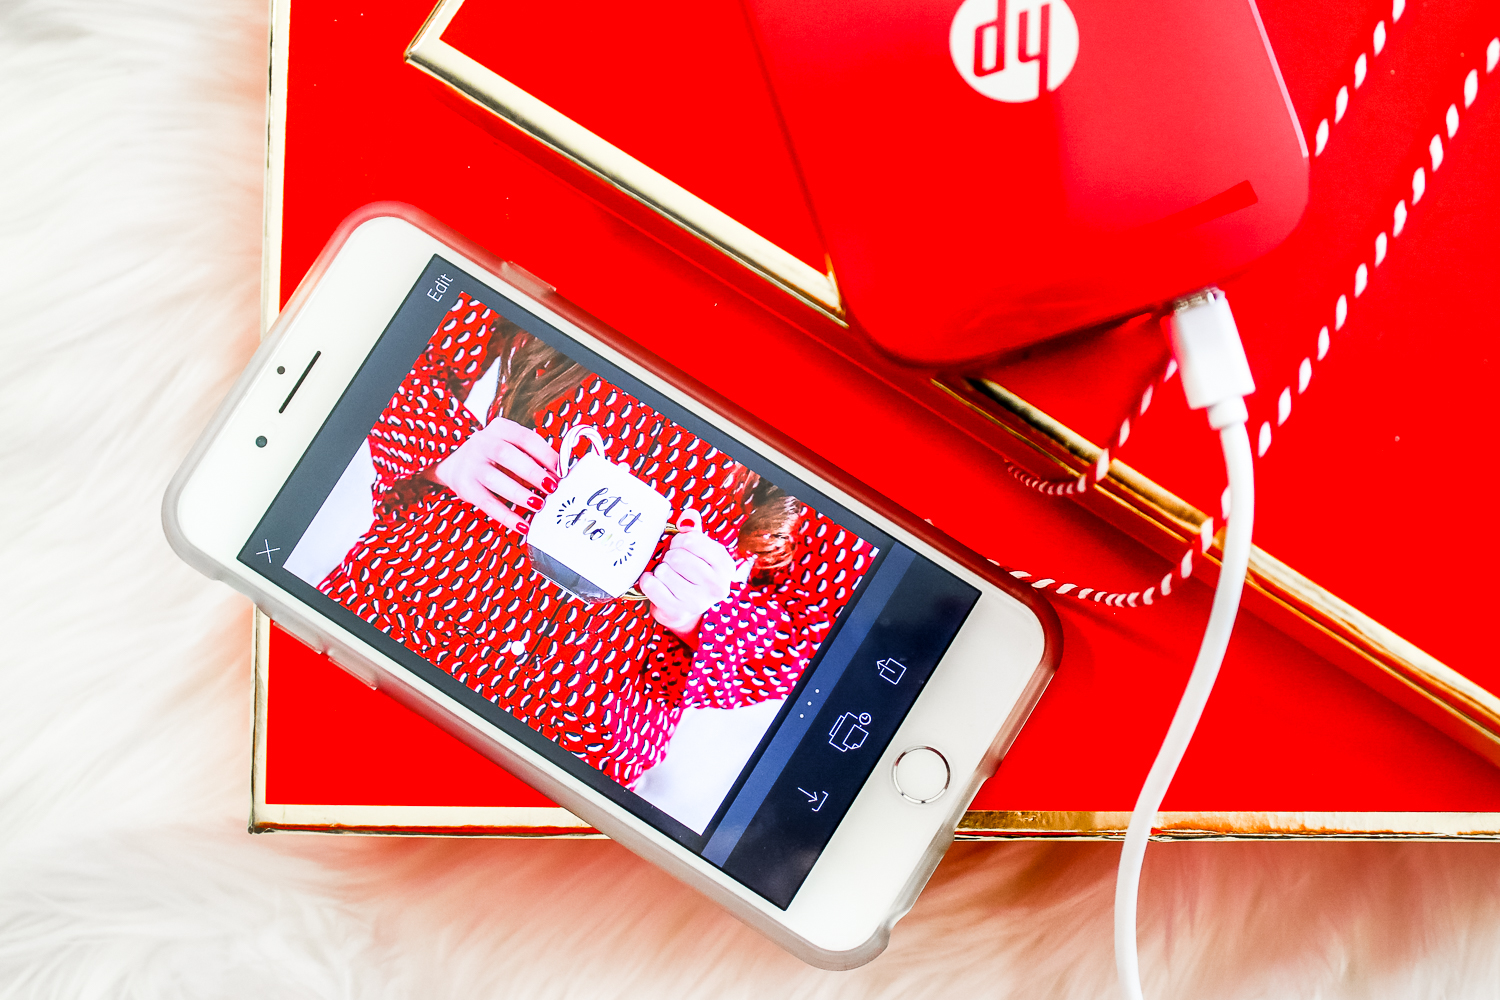 Red HP Sprocket Photo Printer, which makes a perfect stocking stuffer and is the best instant photo printer for events and travel by southern blogger Stephanie Ziajka from Diary of a Debutante